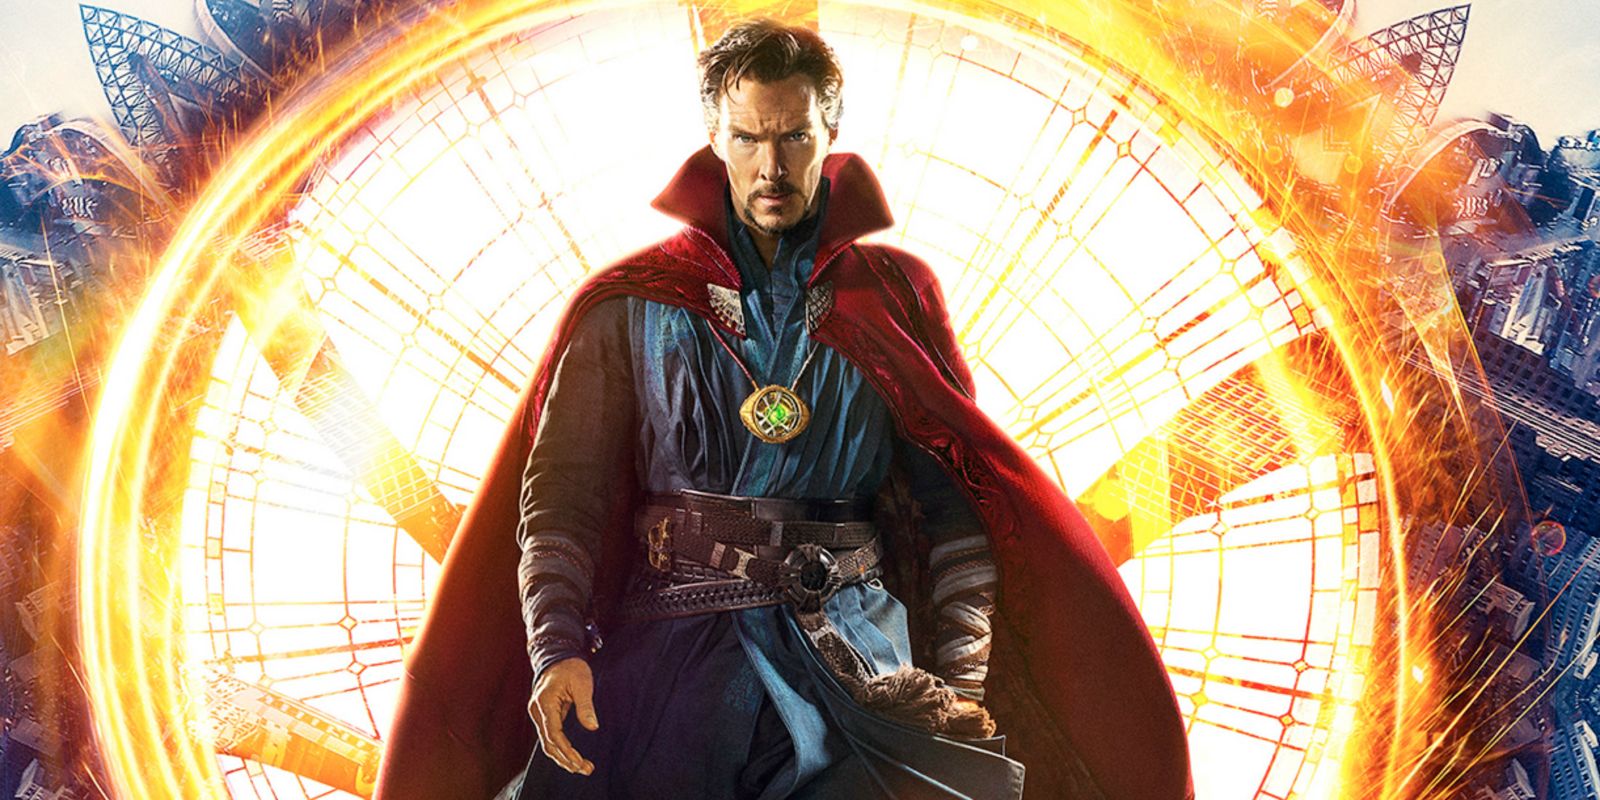 Doctor Strange Comic-Con trailer and poster